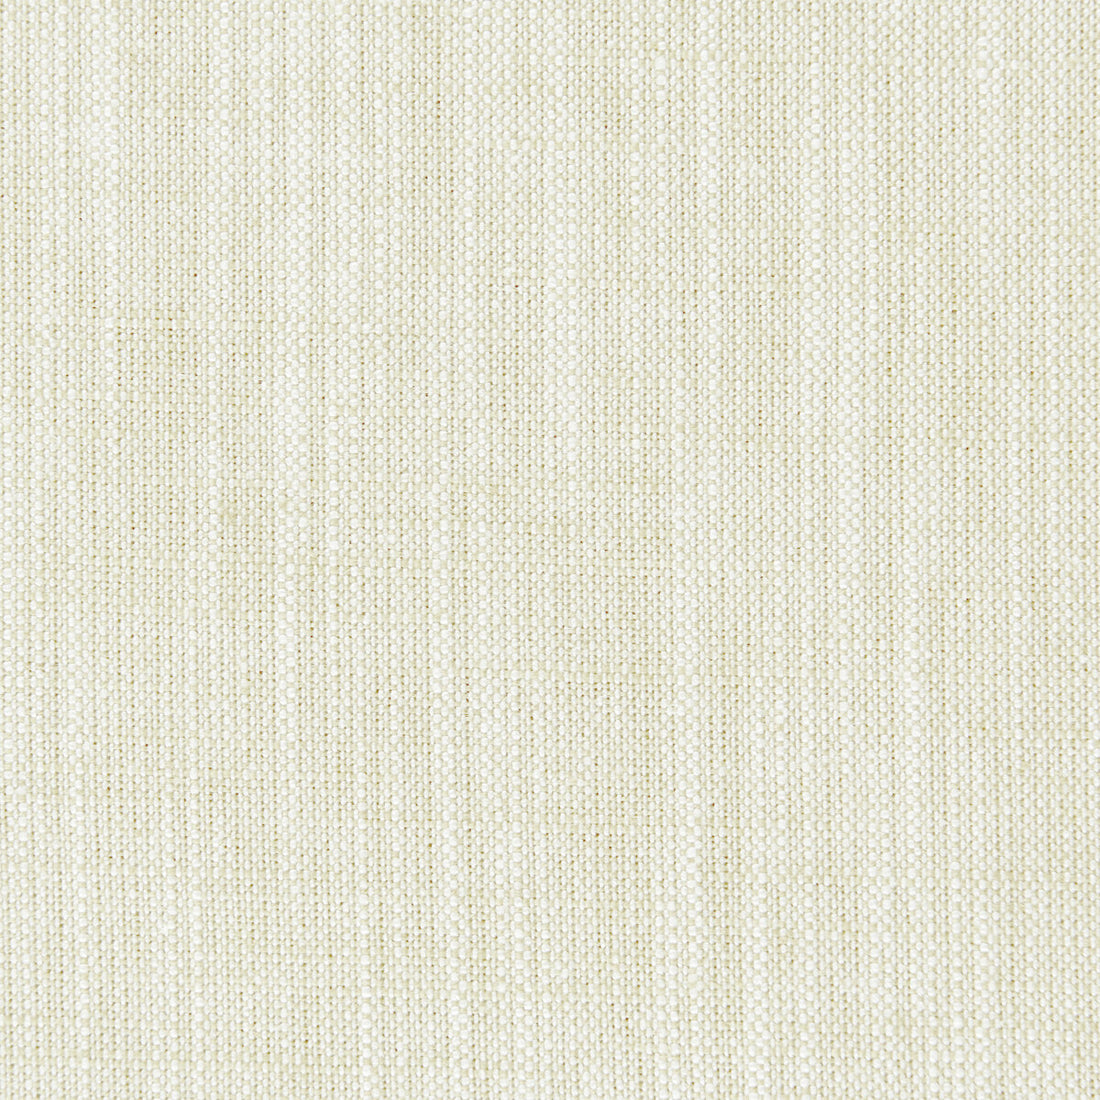 Biarritz fabric in oyster color - pattern F0965/34.CAC.0 - by Clarke And Clarke in the Clarke &amp; Clarke Biarritz collection